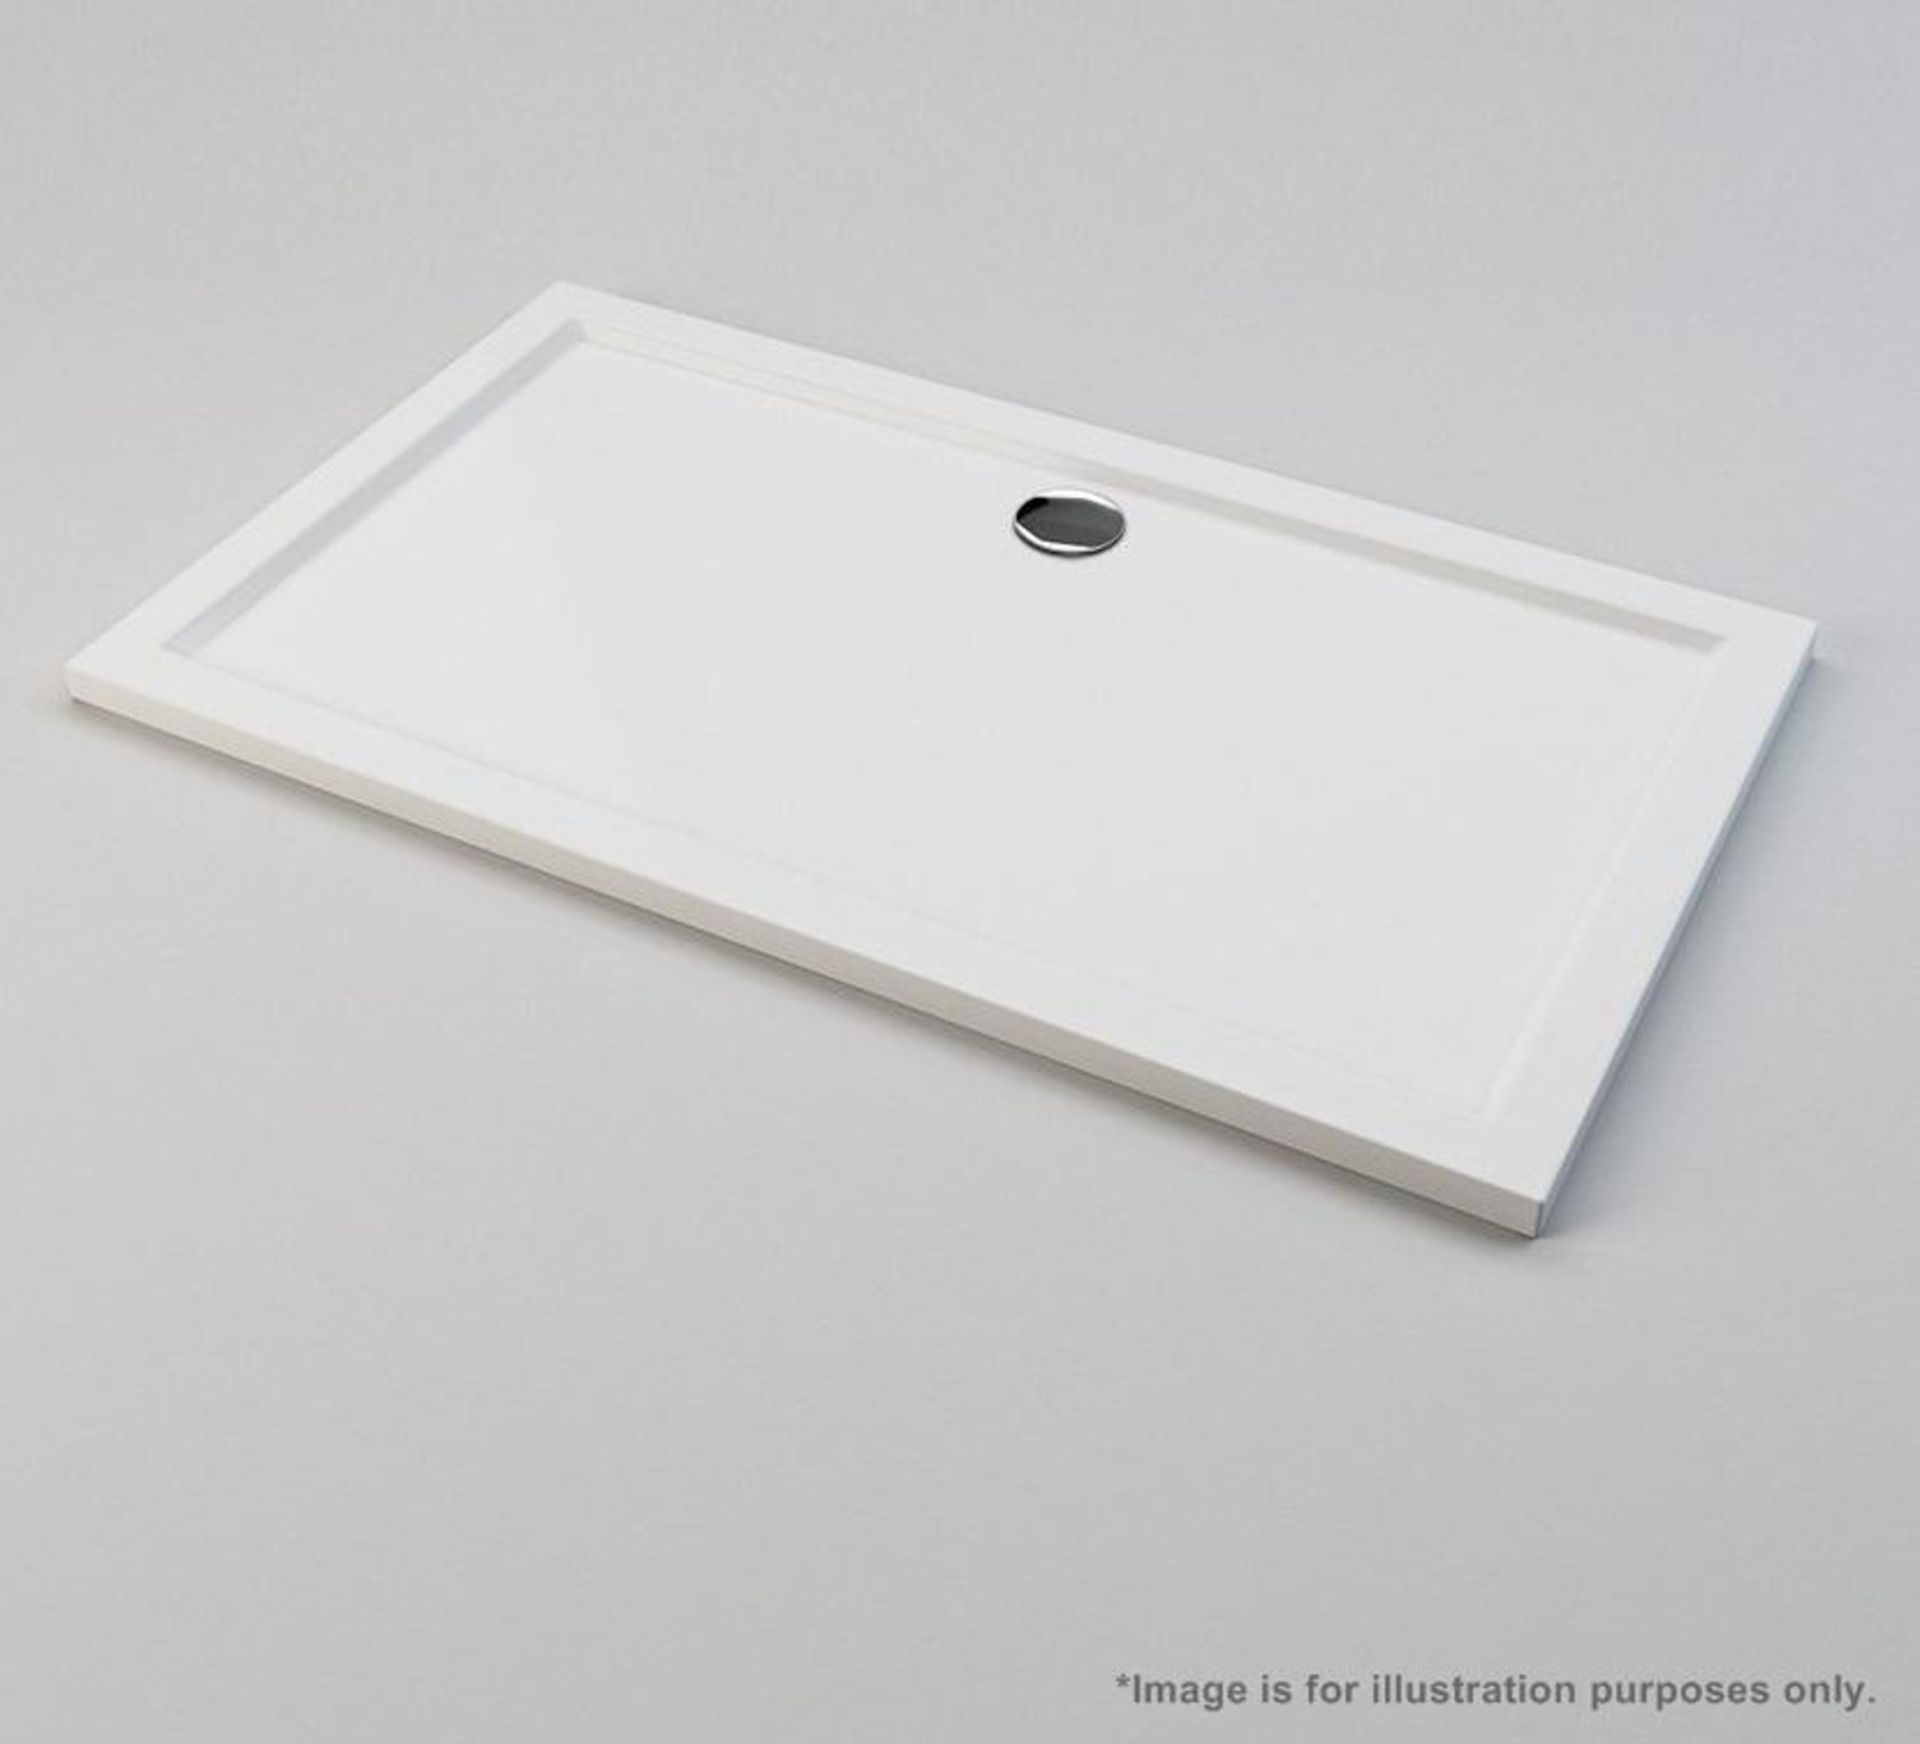 1 x Premier Pearlstone Rectangular Shower Tray 1700mm x 900mm Acrylic - New / Unused Stock - CL269 - - Image 4 of 4